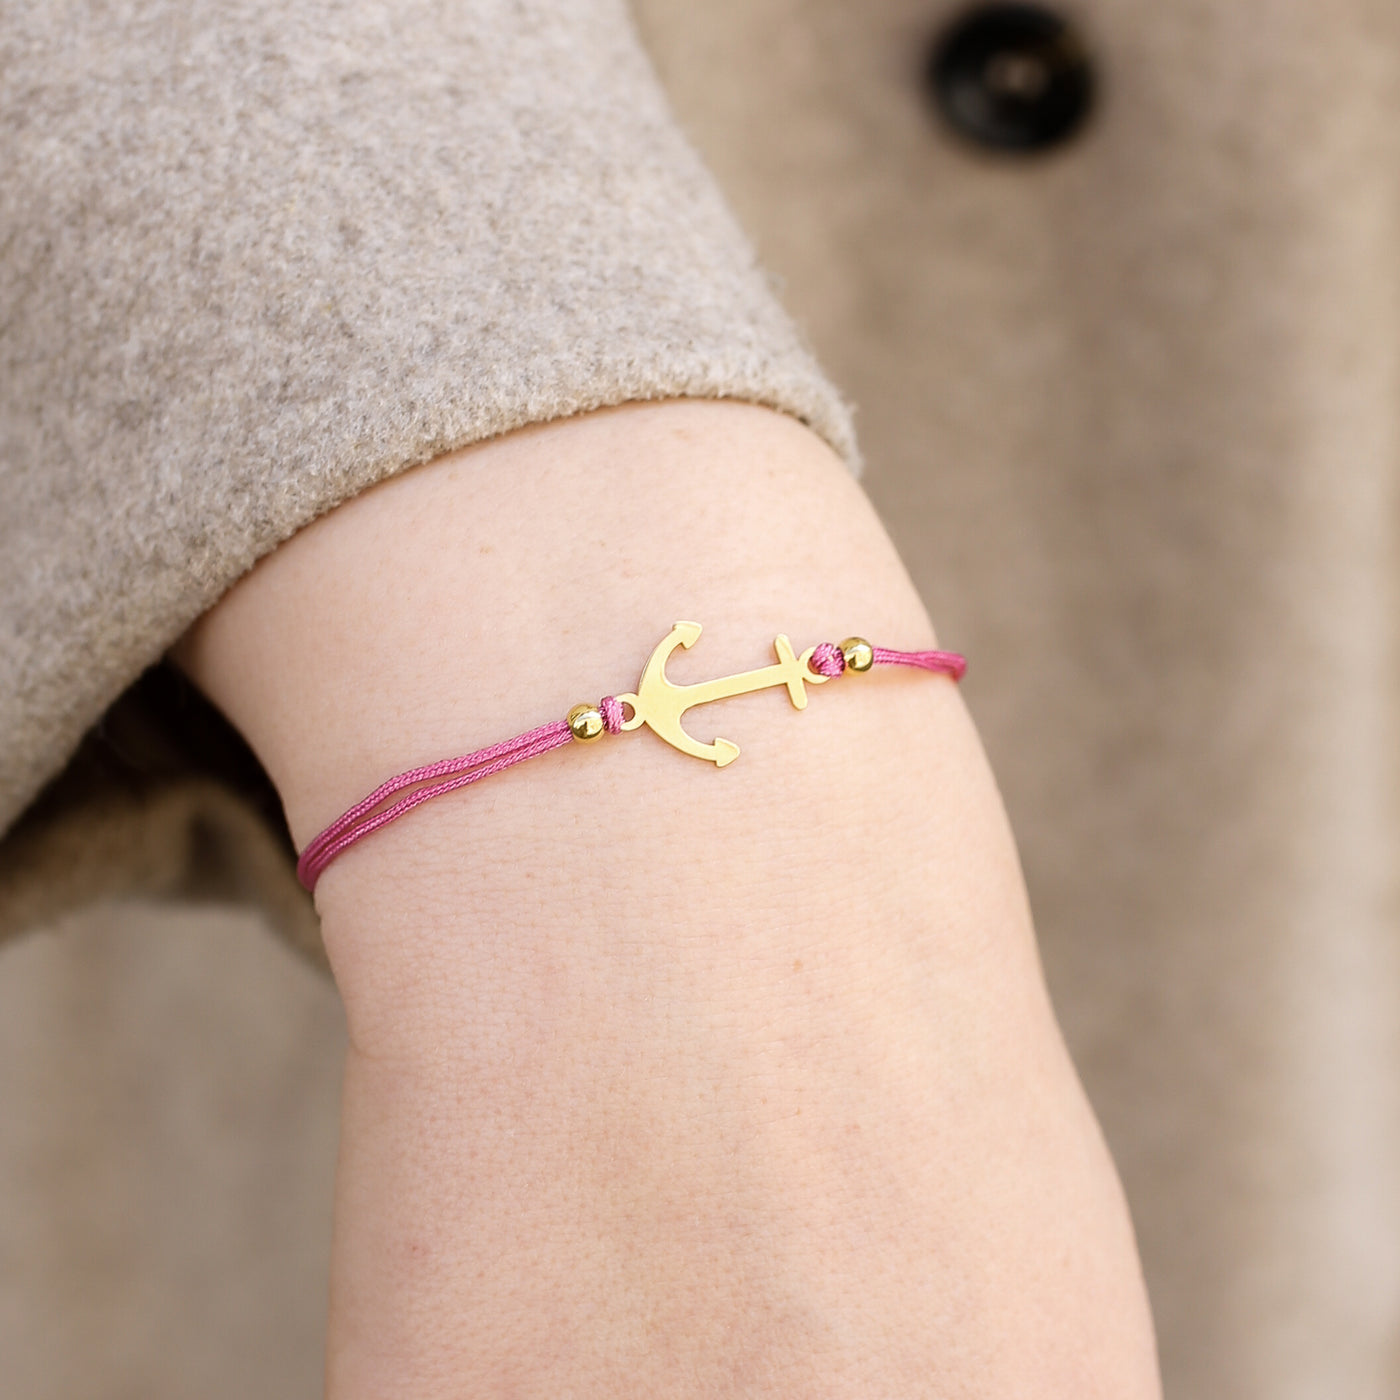 Bracelet with anchor pendant and Happiness greeting card